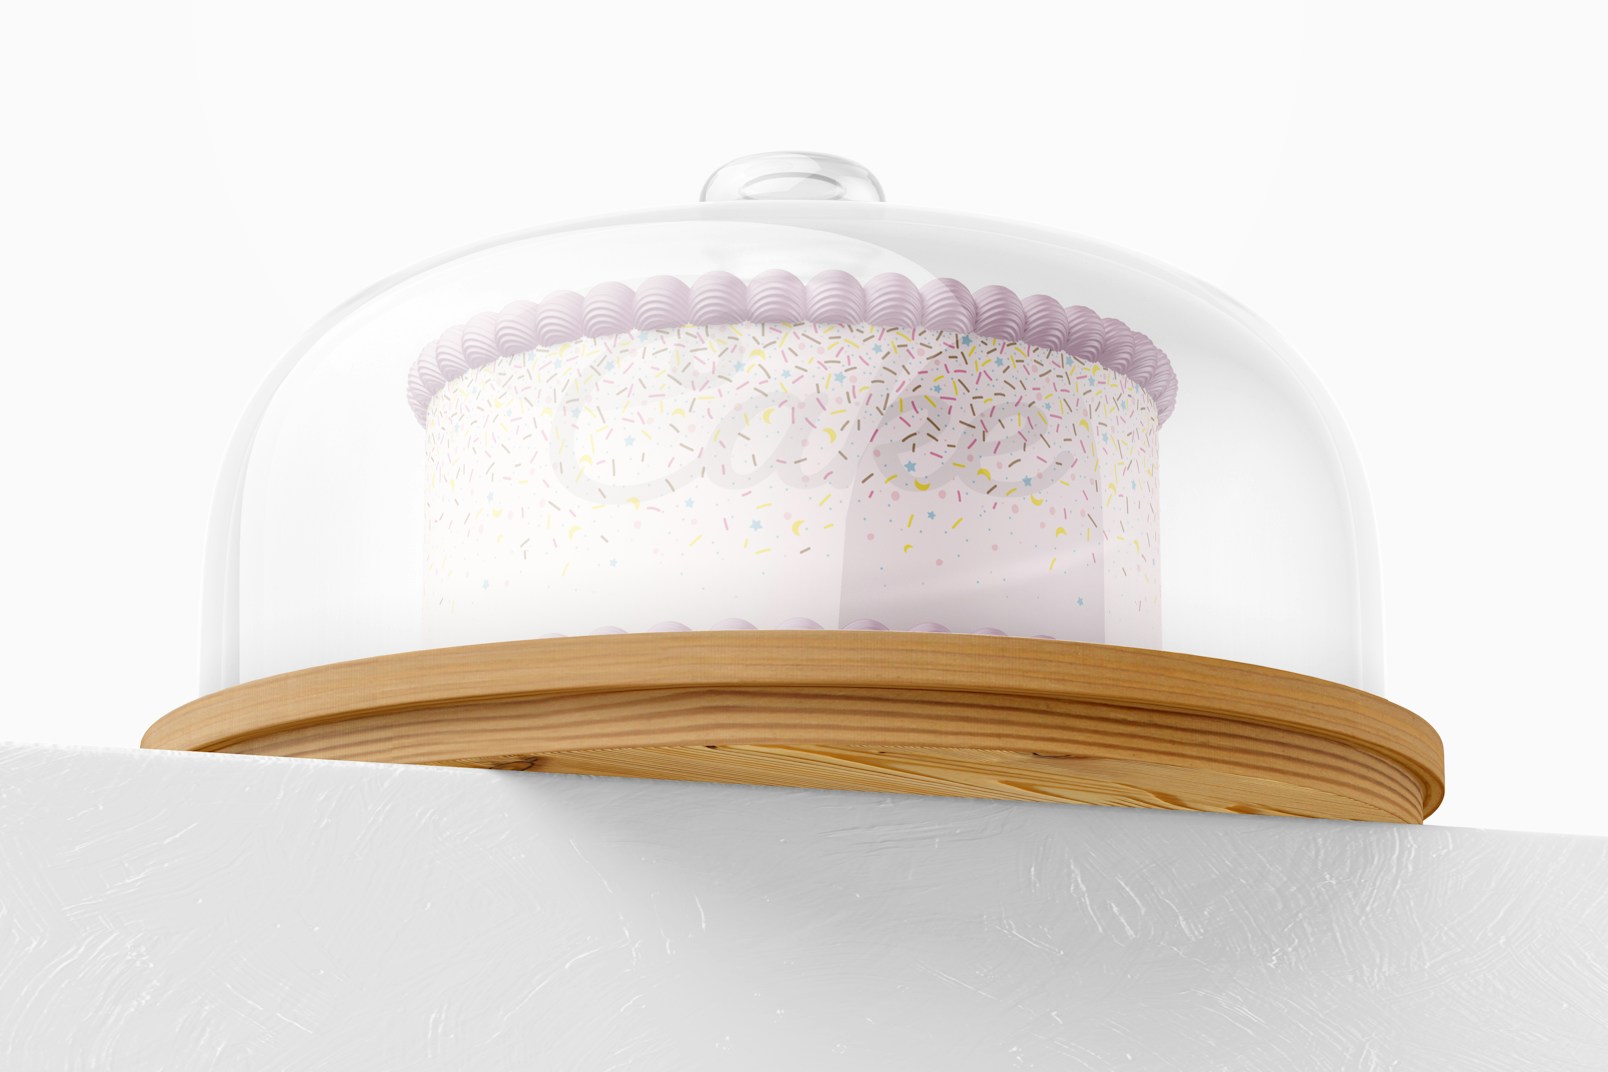 Cake Stand with Dome Lid Mockup, Low Angle View